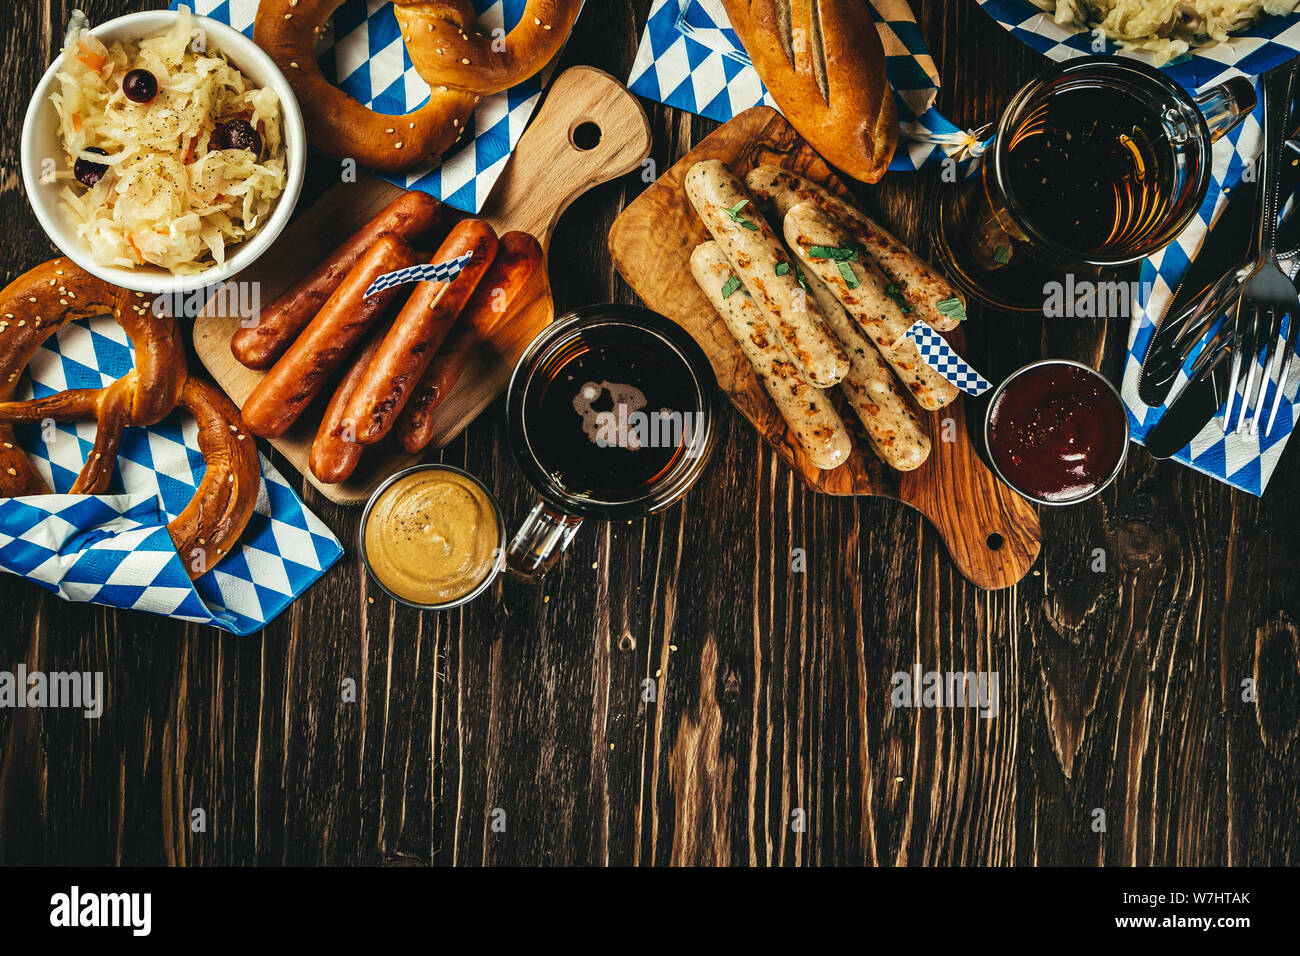 October fest concept - traditional food and beer served at event Stock Photo